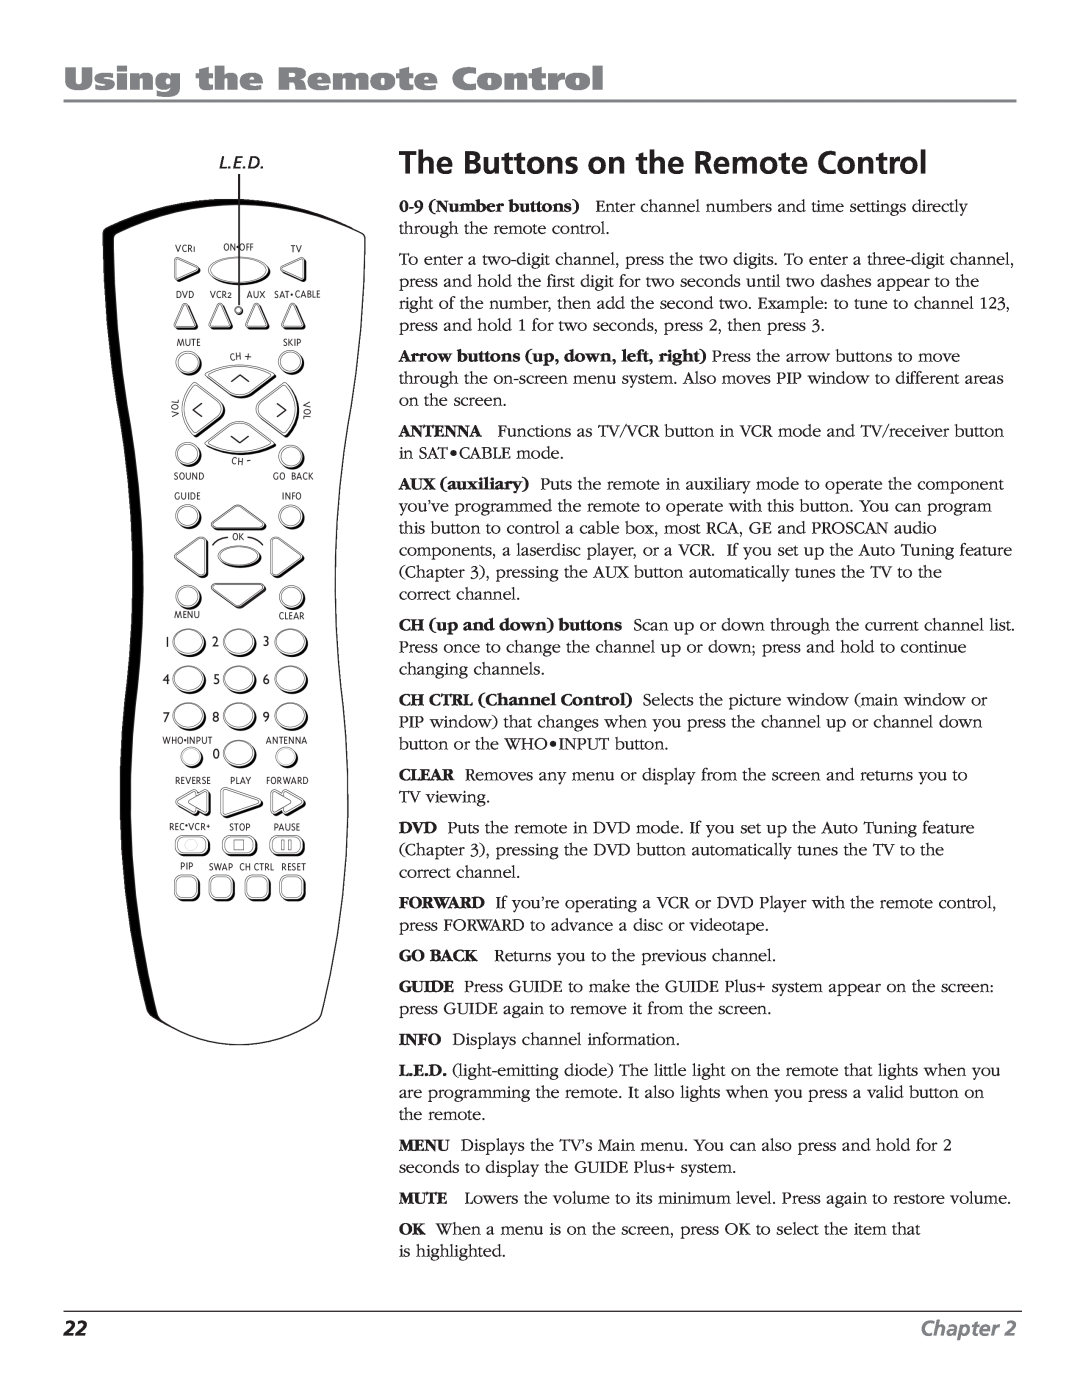 RCA F27669 manual Using the Remote Control, The Buttons on the Remote Control, Chapter, L.E.D 